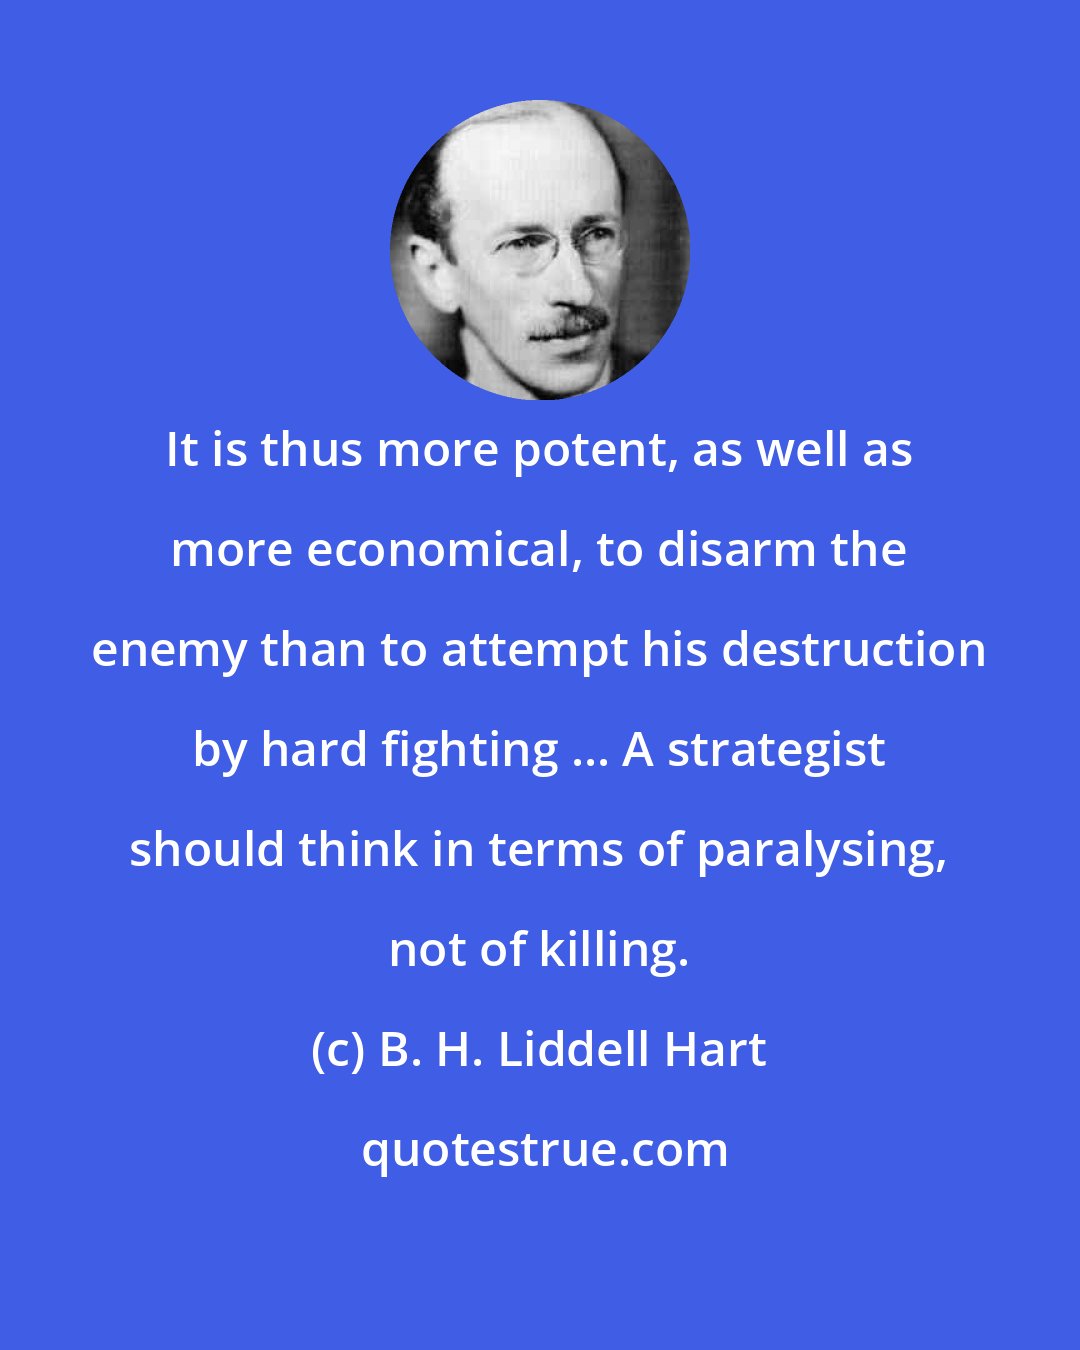 B. H. Liddell Hart: It is thus more potent, as well as more economical, to disarm the enemy than to attempt his destruction by hard fighting ... A strategist should think in terms of paralysing, not of killing.